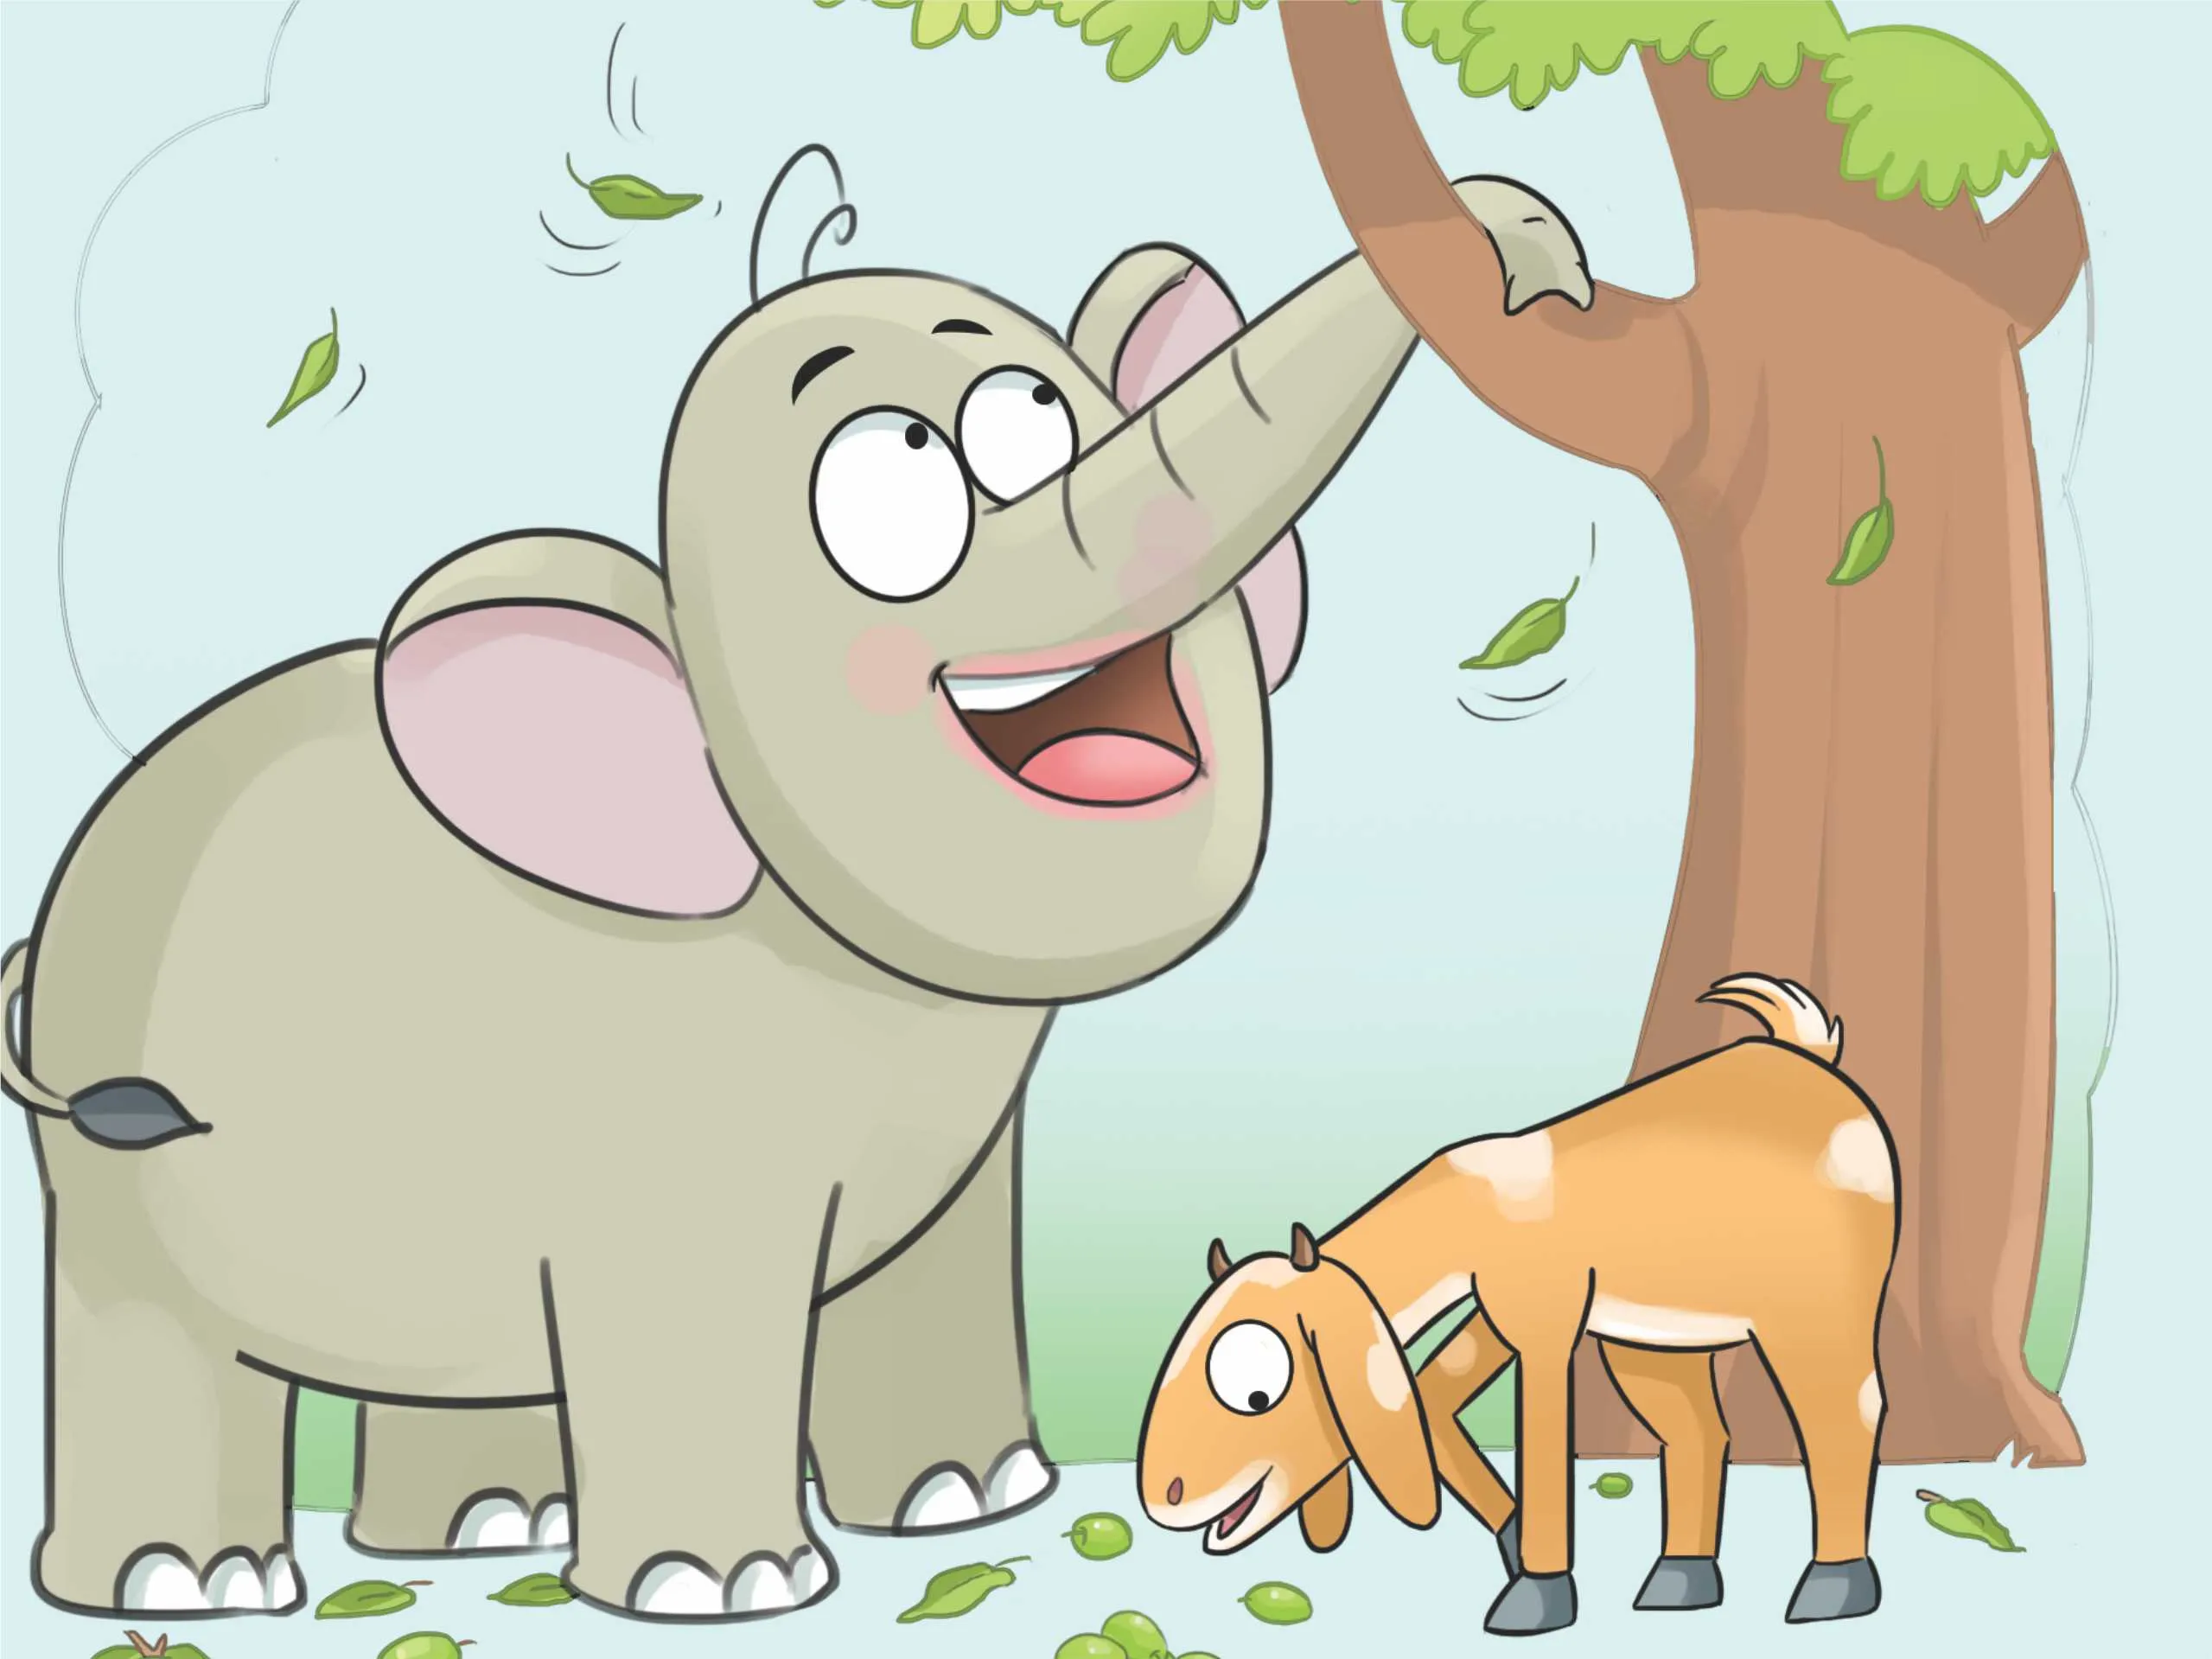 Cartoon image of an elephant with goat